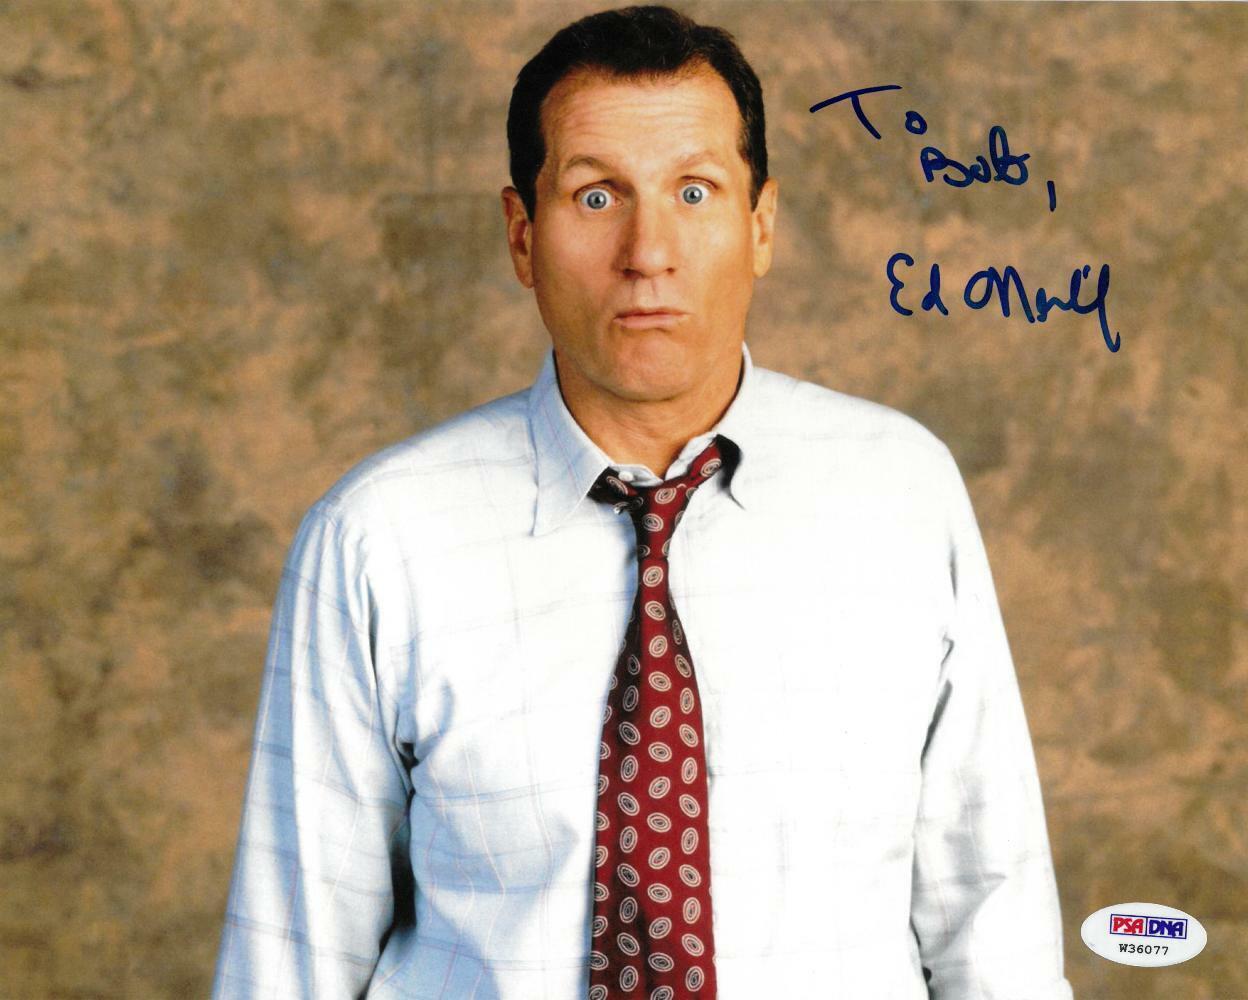 Ed O'Neill Signed Married With Children Autographed 8x10 Photo Poster painting PSA/DNA #W36077